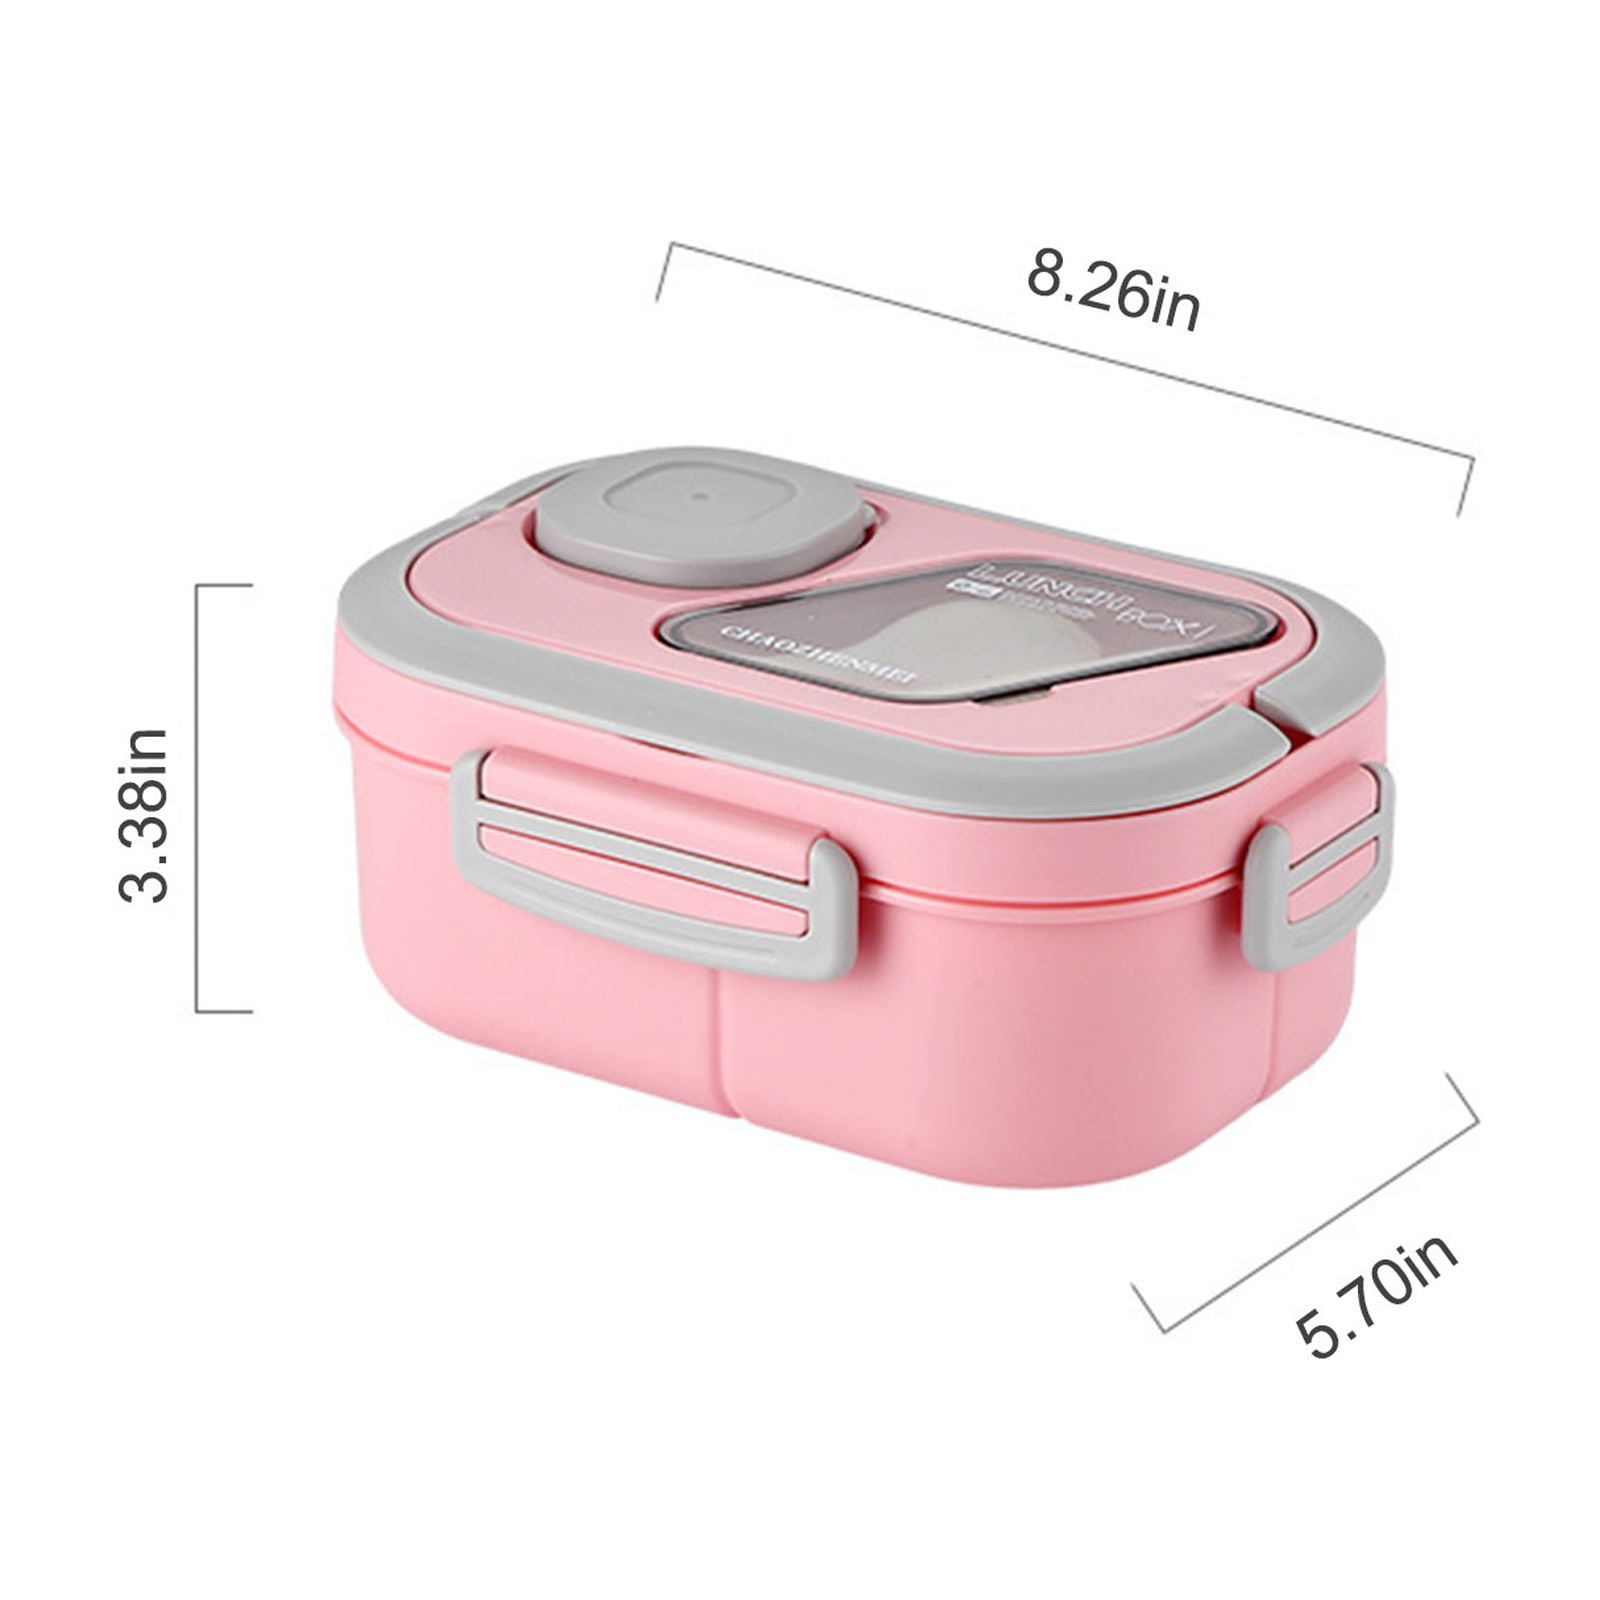 7Penn Insulated Lunch Box Containers 43 oz Capacity - 3 Tier Stackable  Stainless Steel Thermal Lunch…See more 7Penn Insulated Lunch Box Containers  43